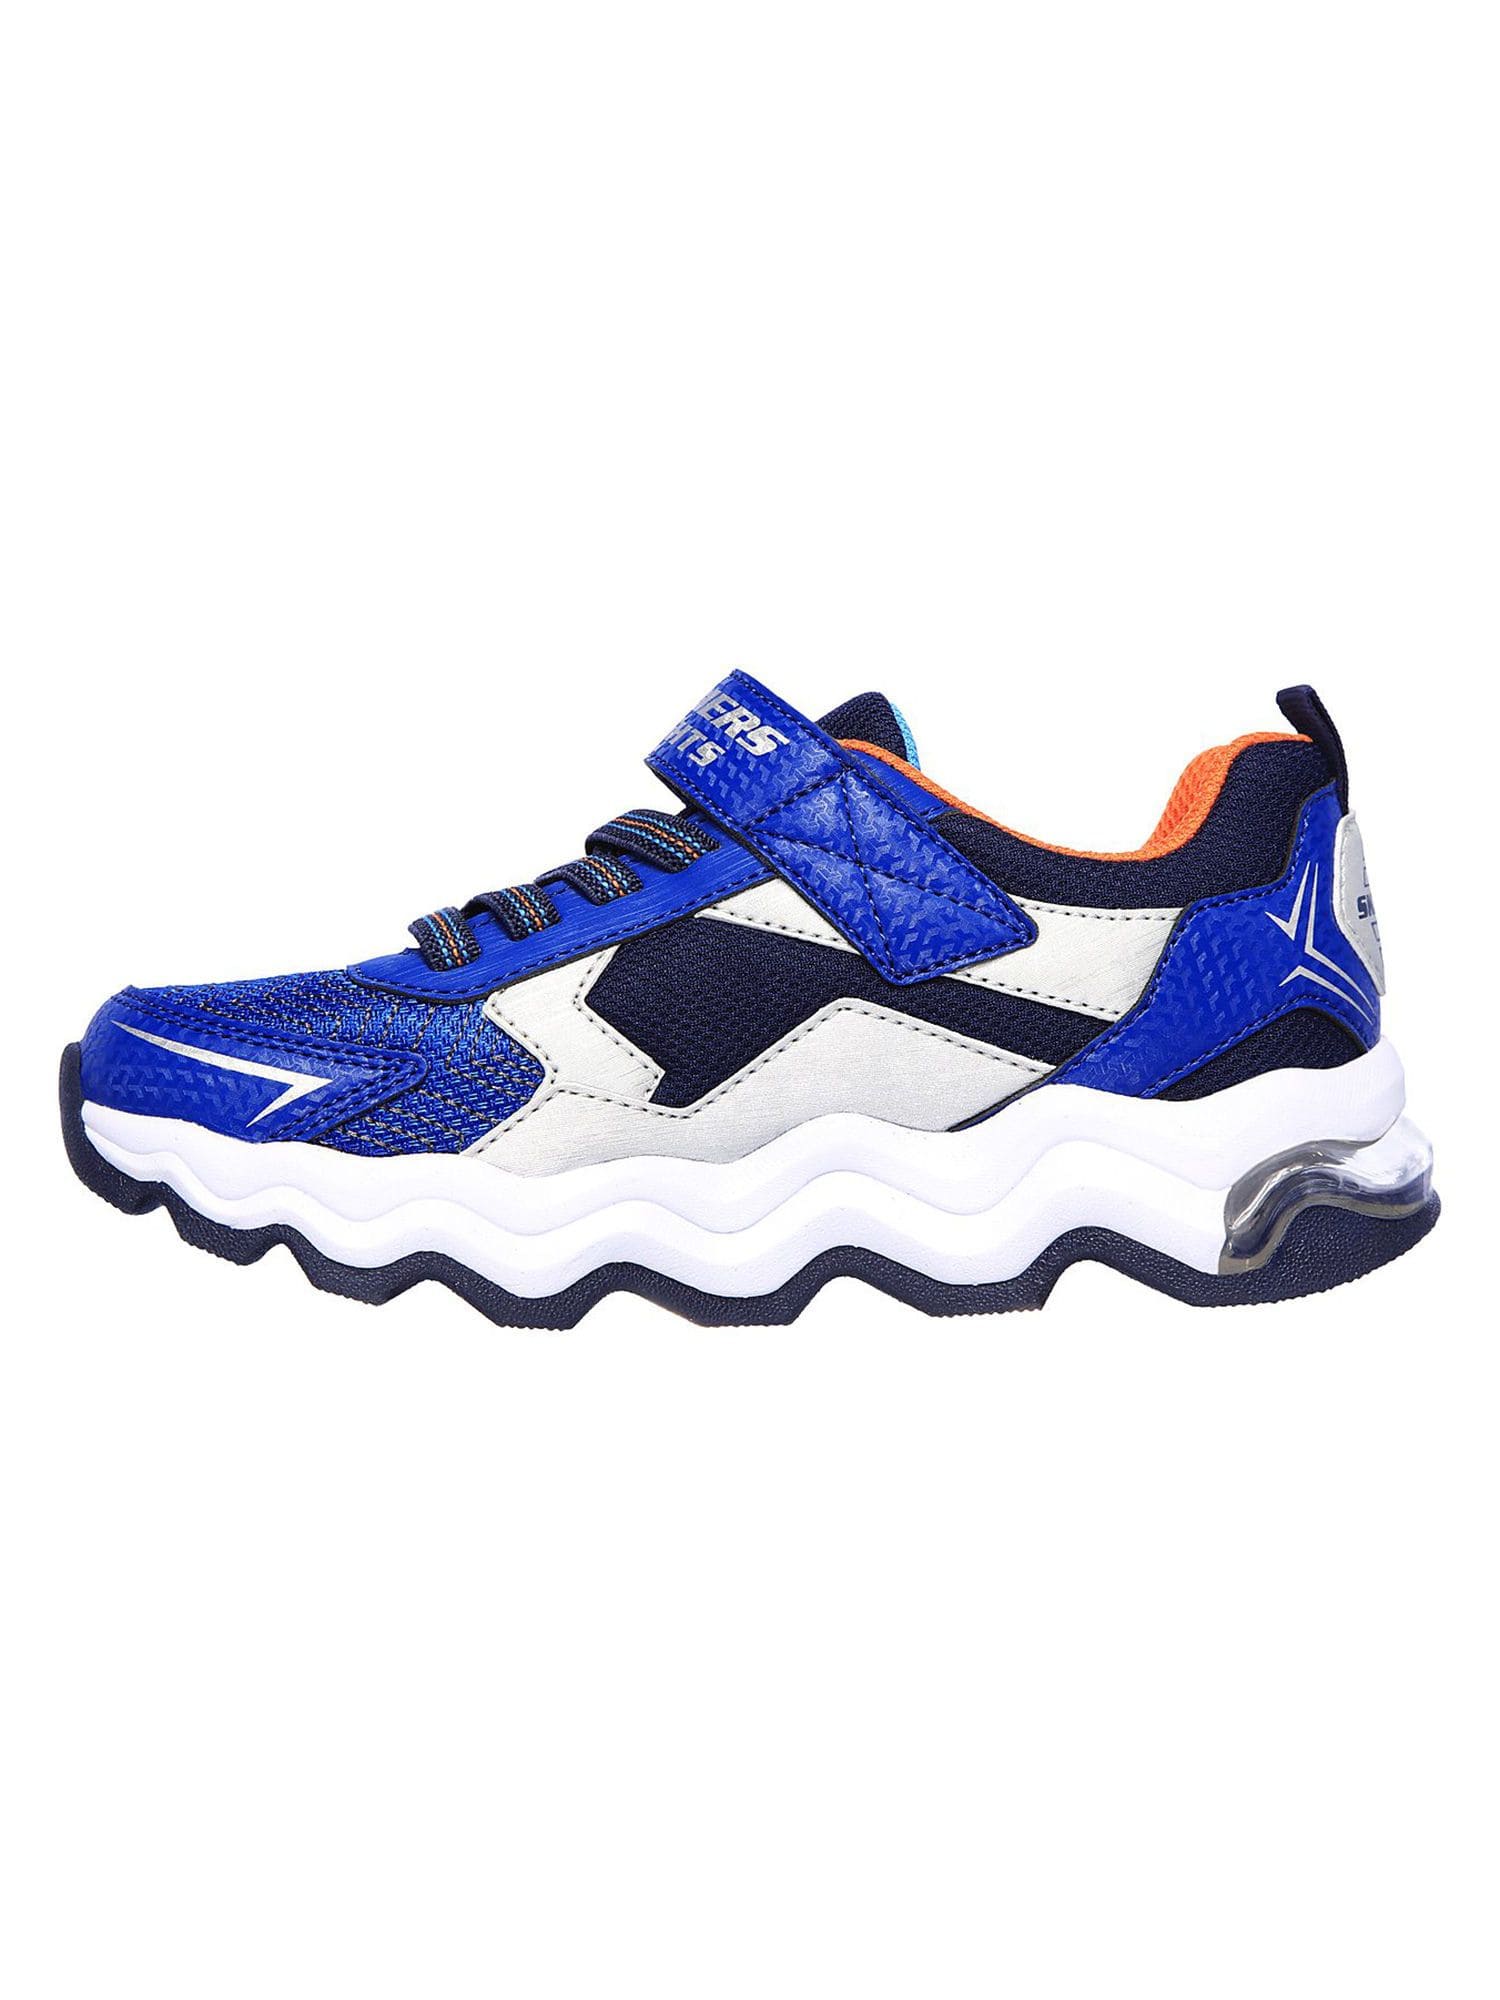 SKECHERS Kids Shoes 30 / Royal Blue Turbowave Solid Running Shoes